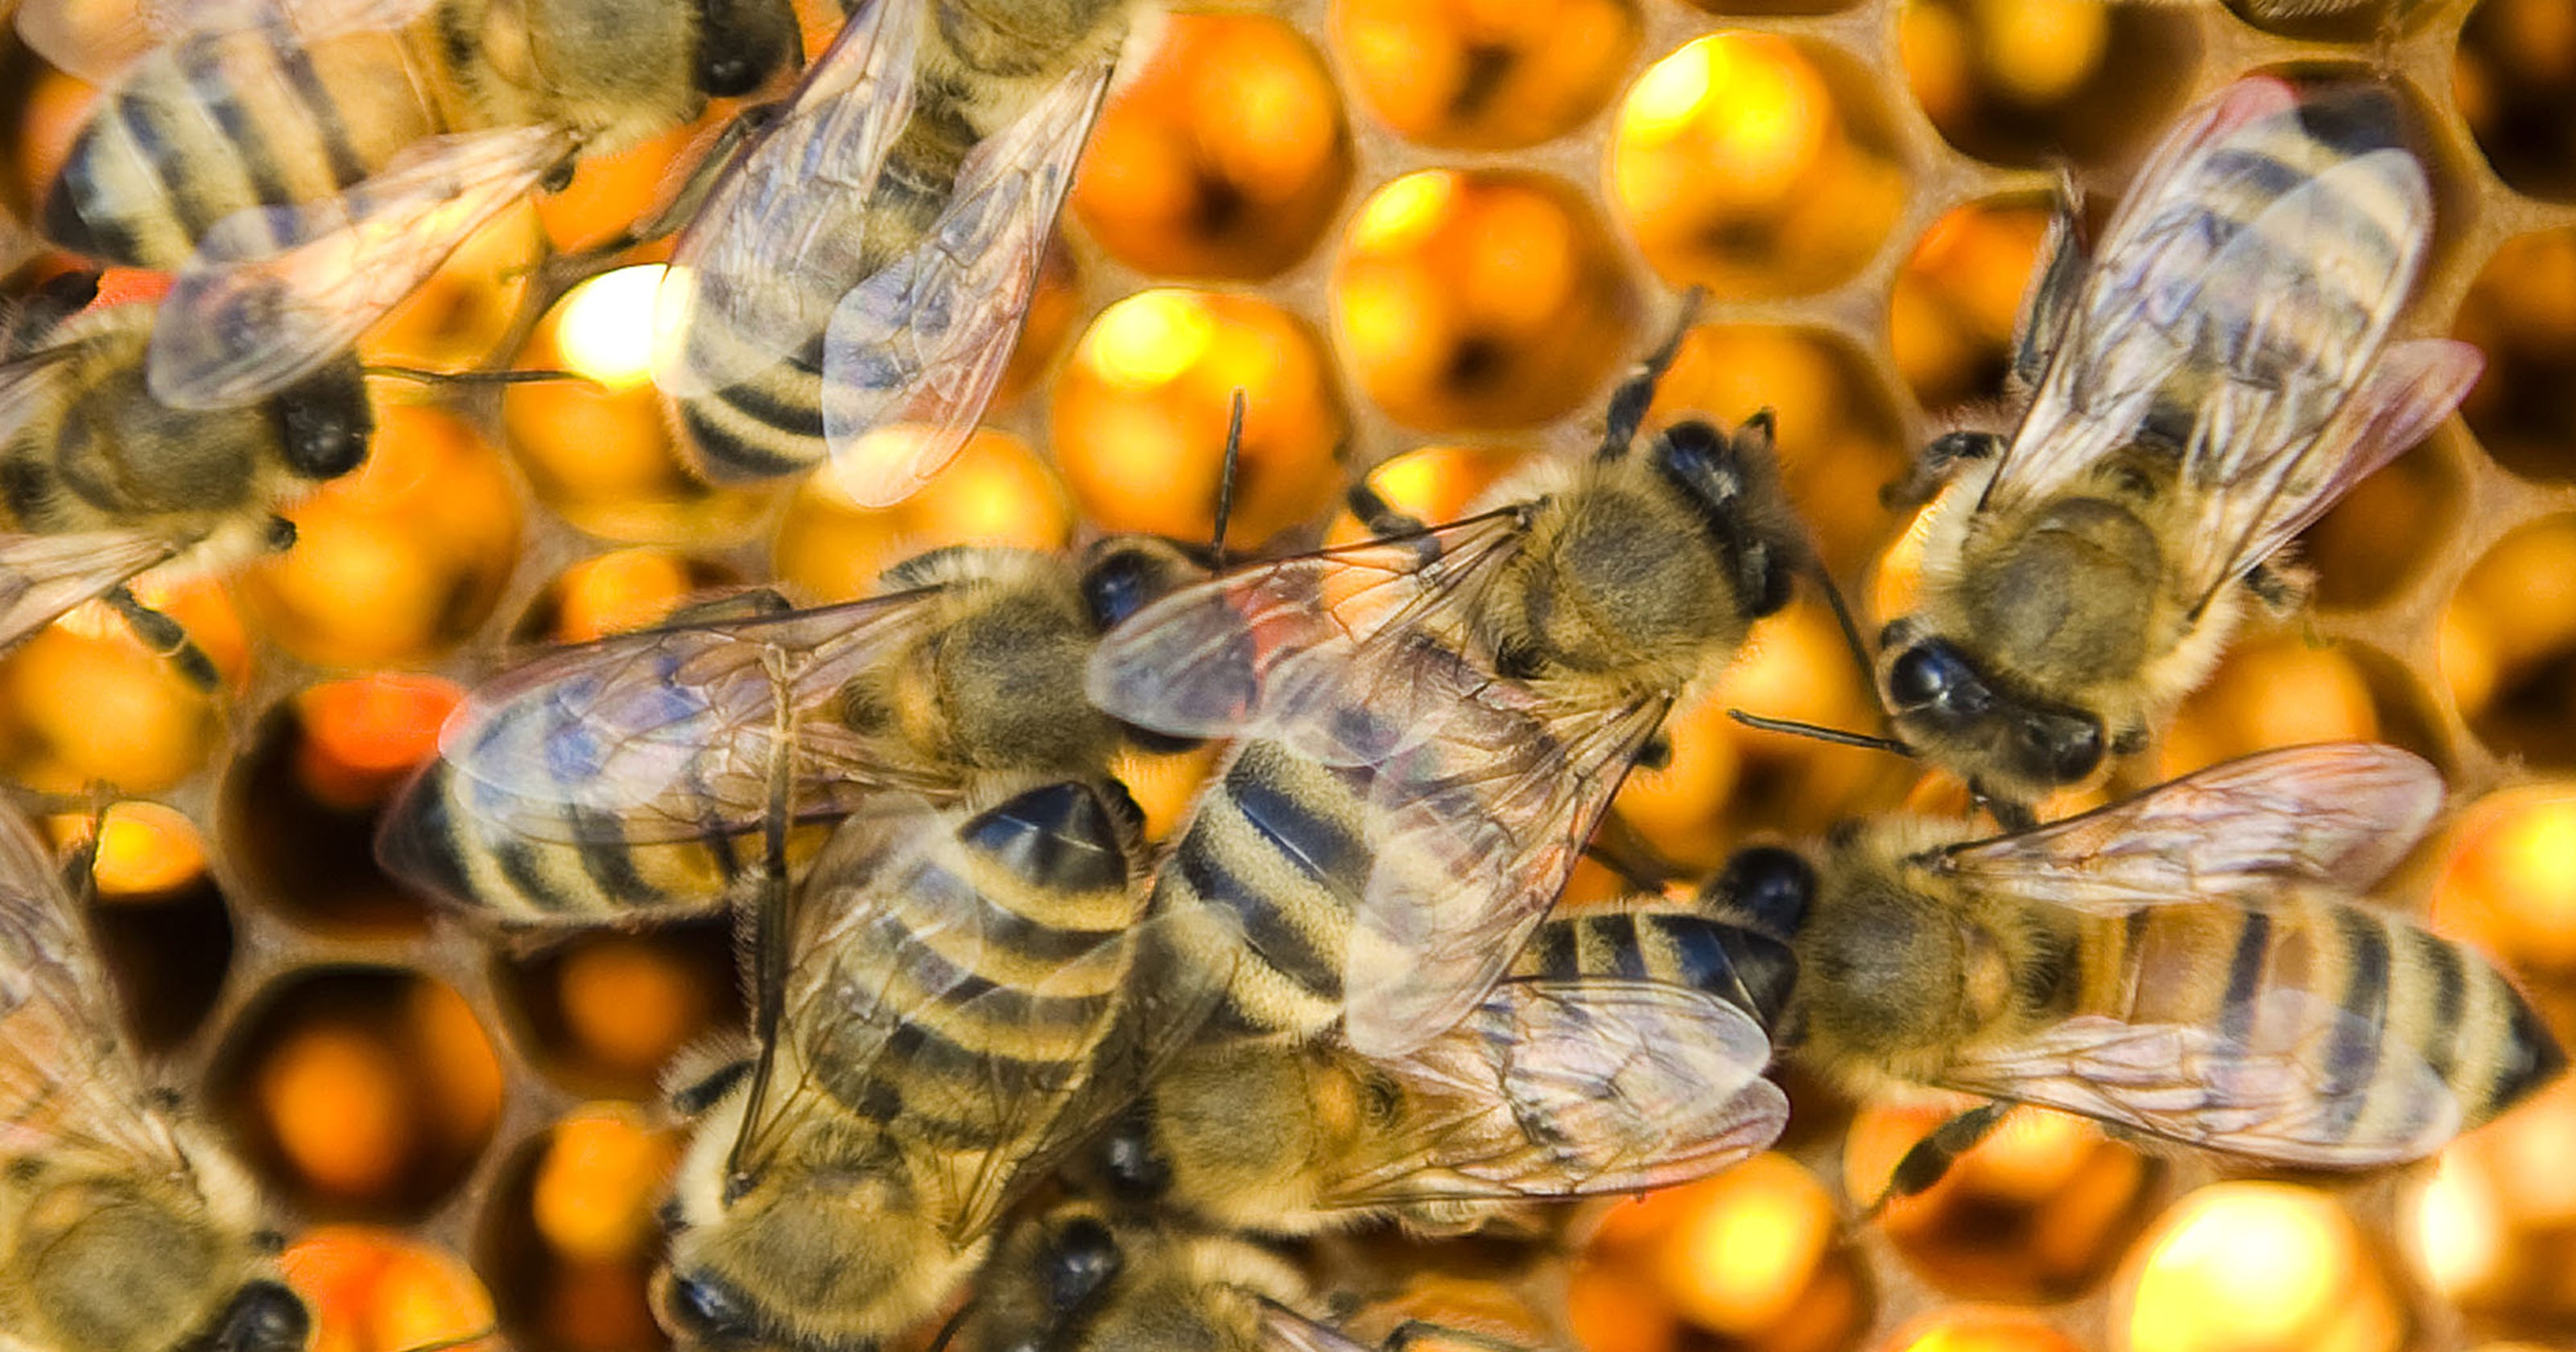 National Honey Bee Day Festival coming to Cocoa